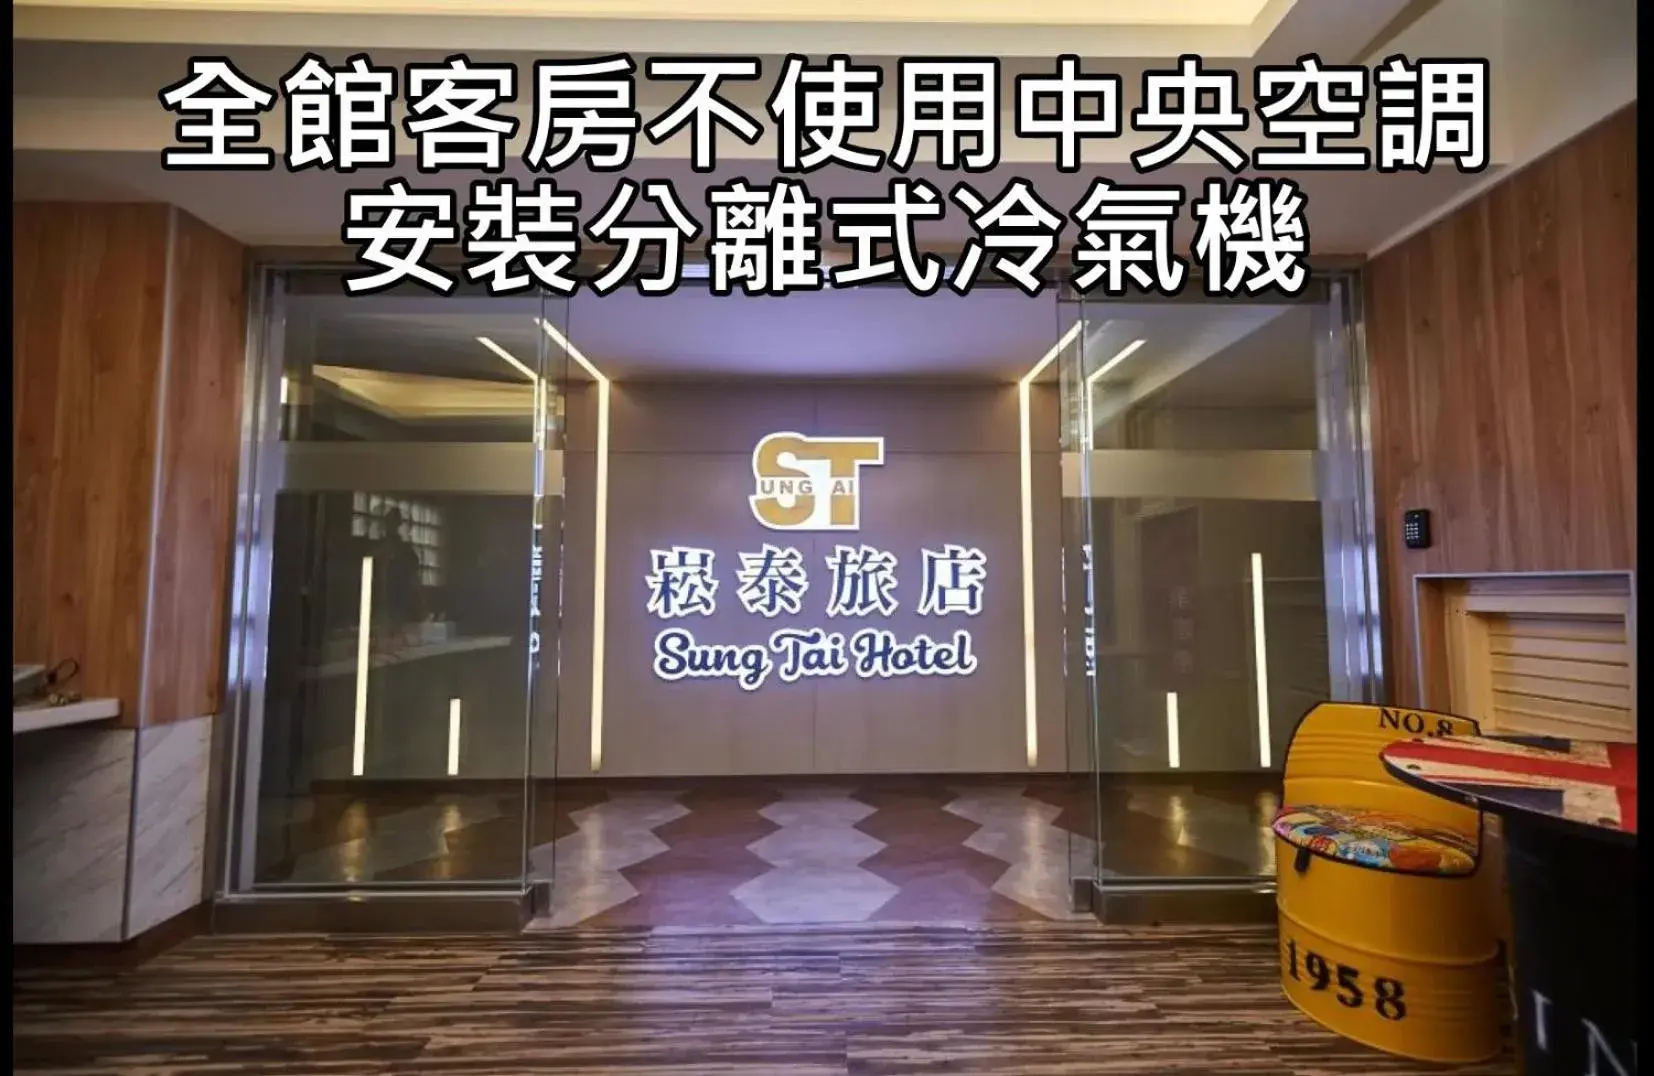 Property logo or sign in Sung Tai Hotel